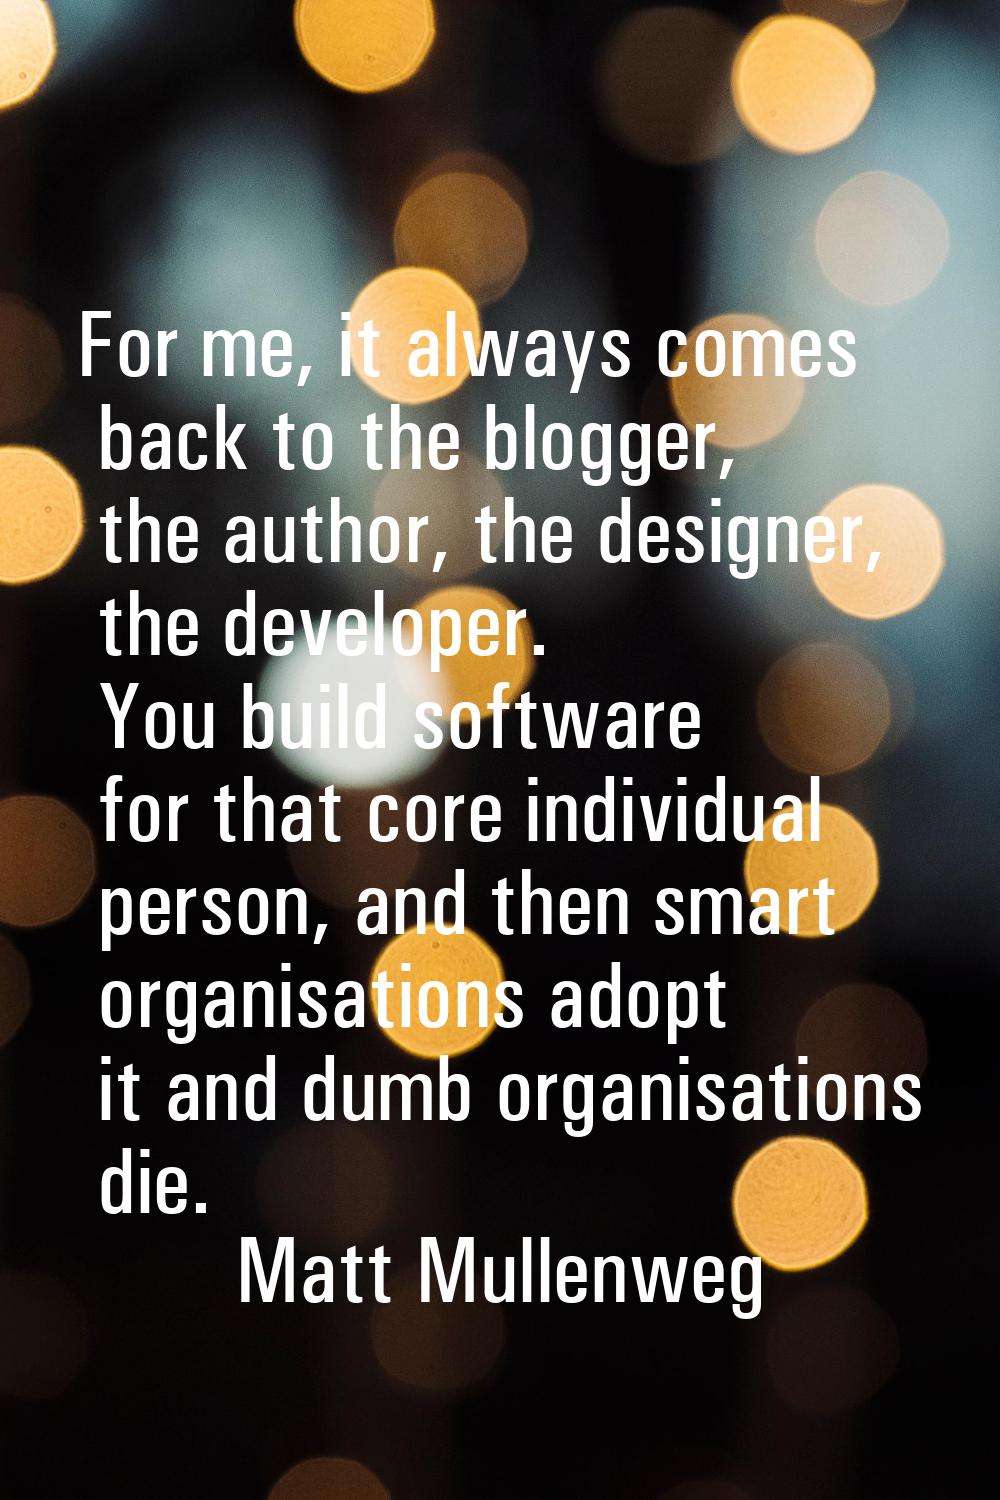 For me, it always comes back to the blogger, the author, the designer, the developer. You build sof